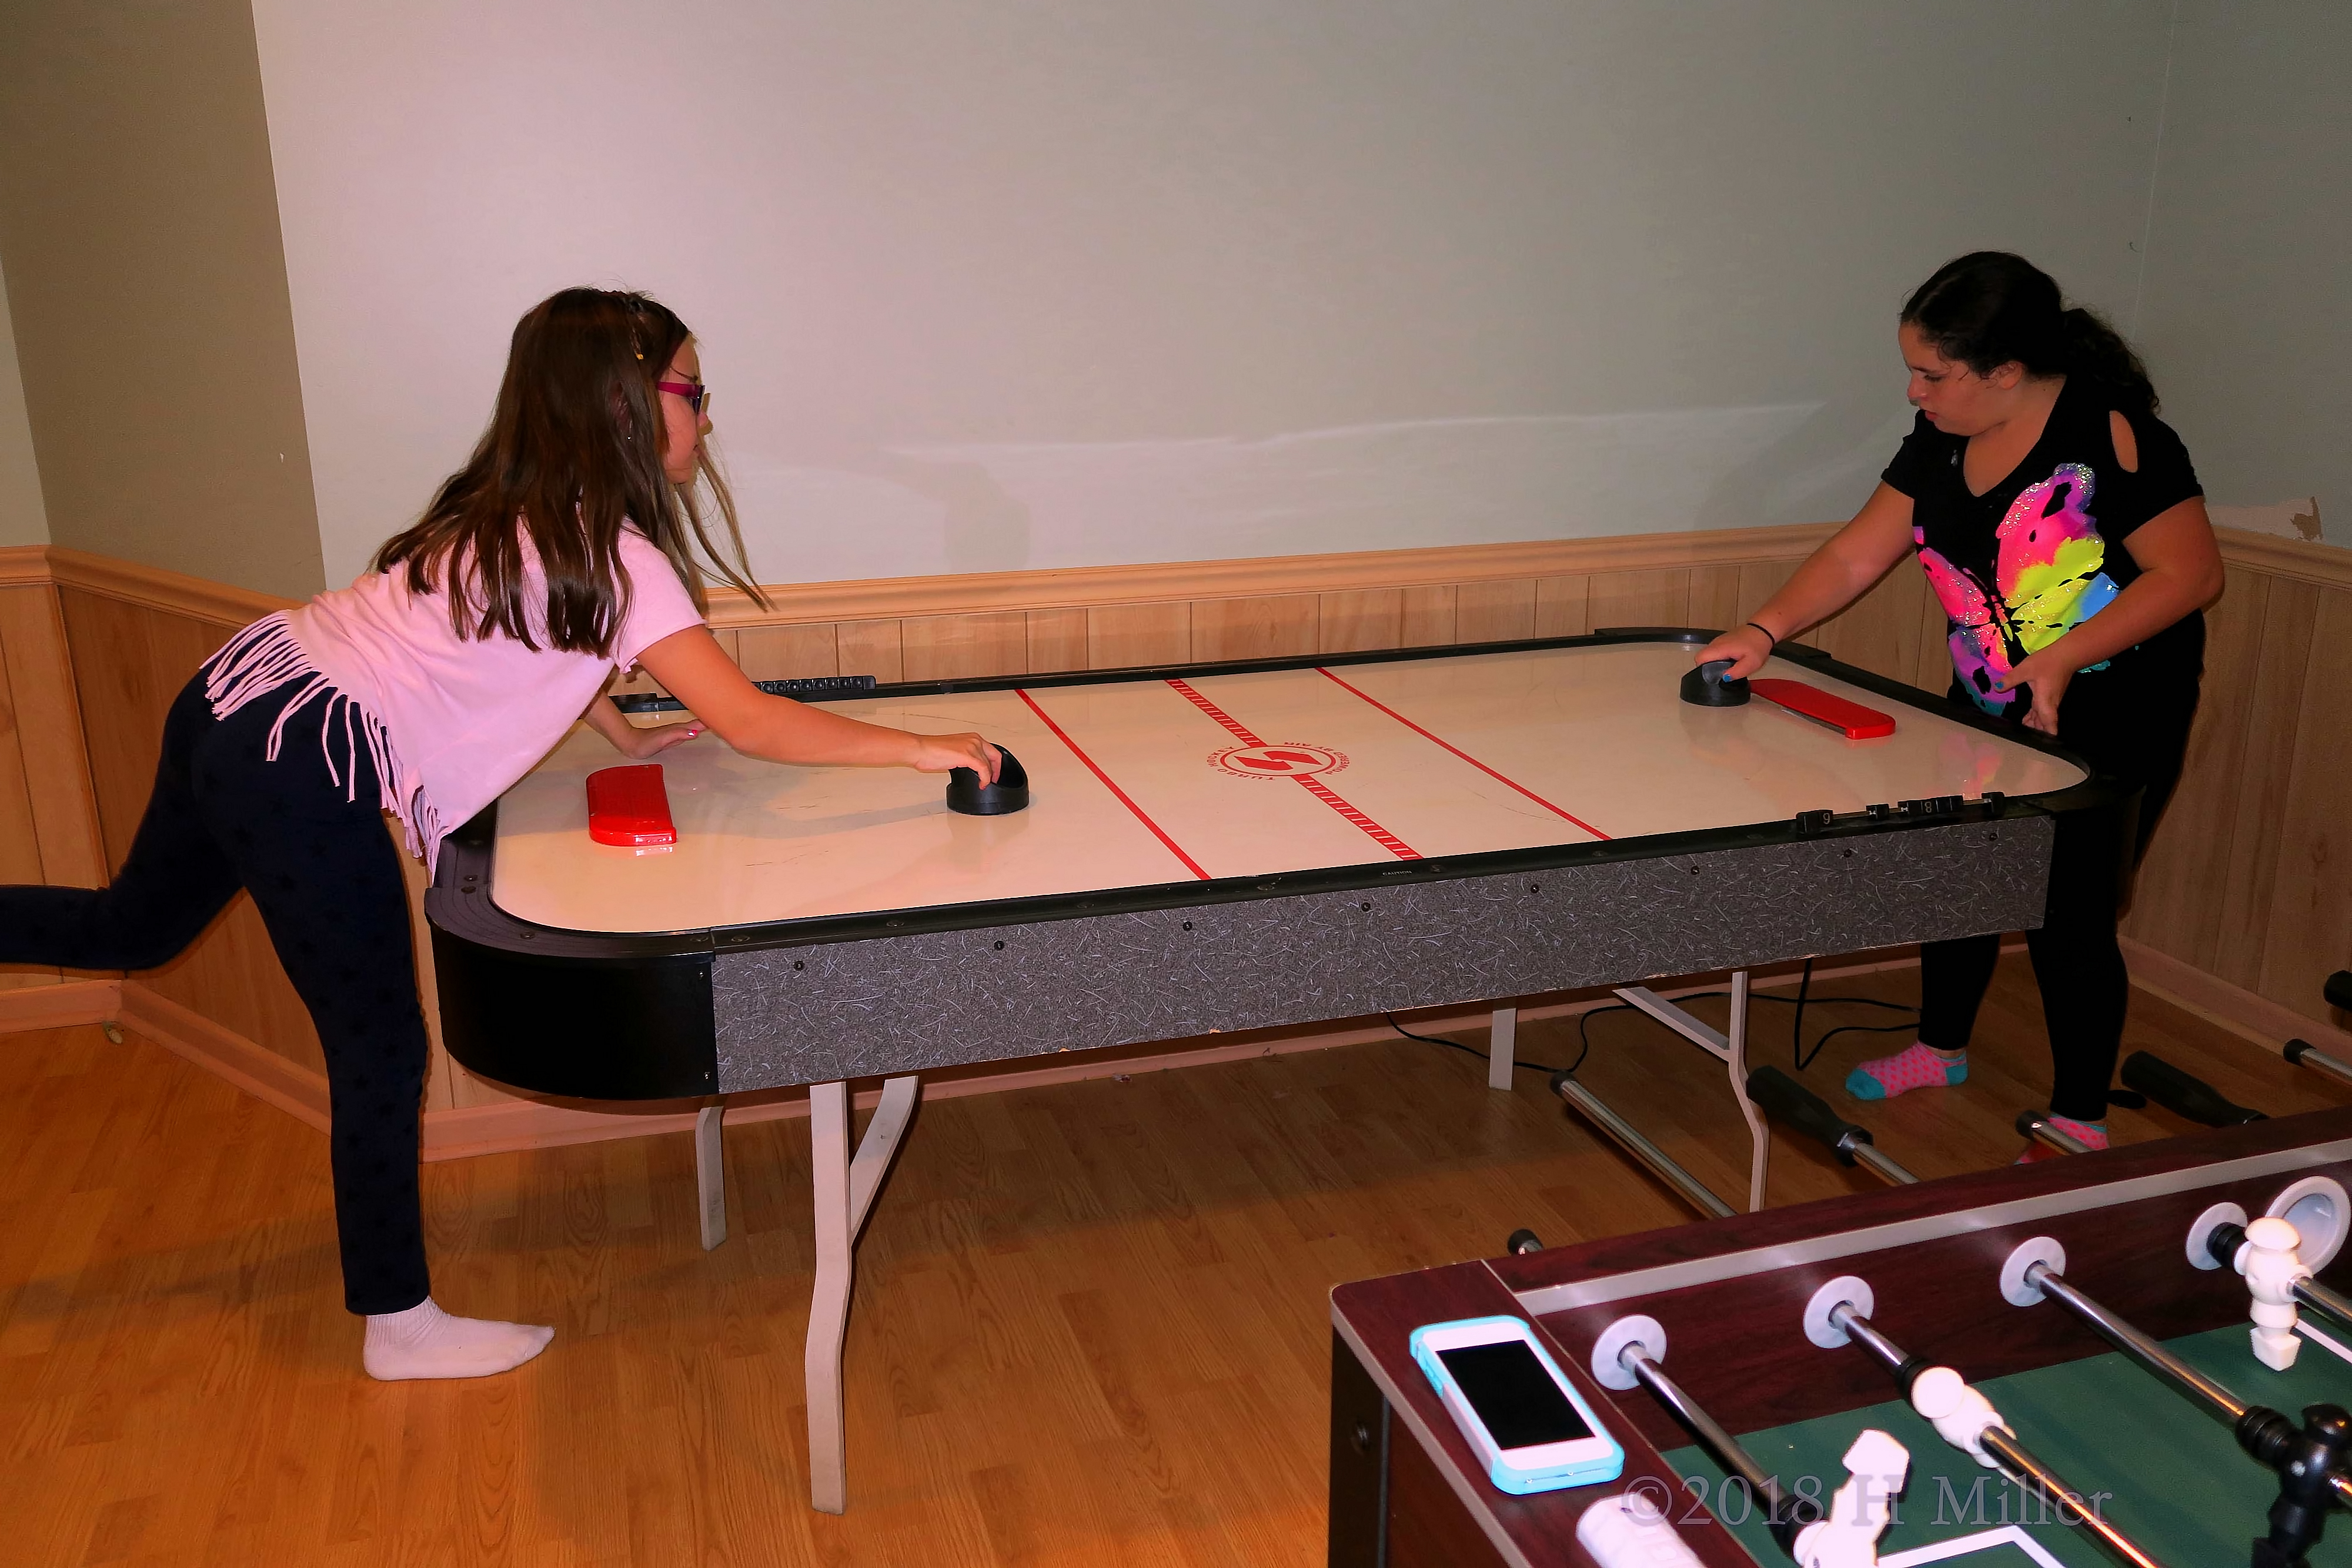 They Give Strong Competiton To Each Other, Both Swift At Ping Pong! 